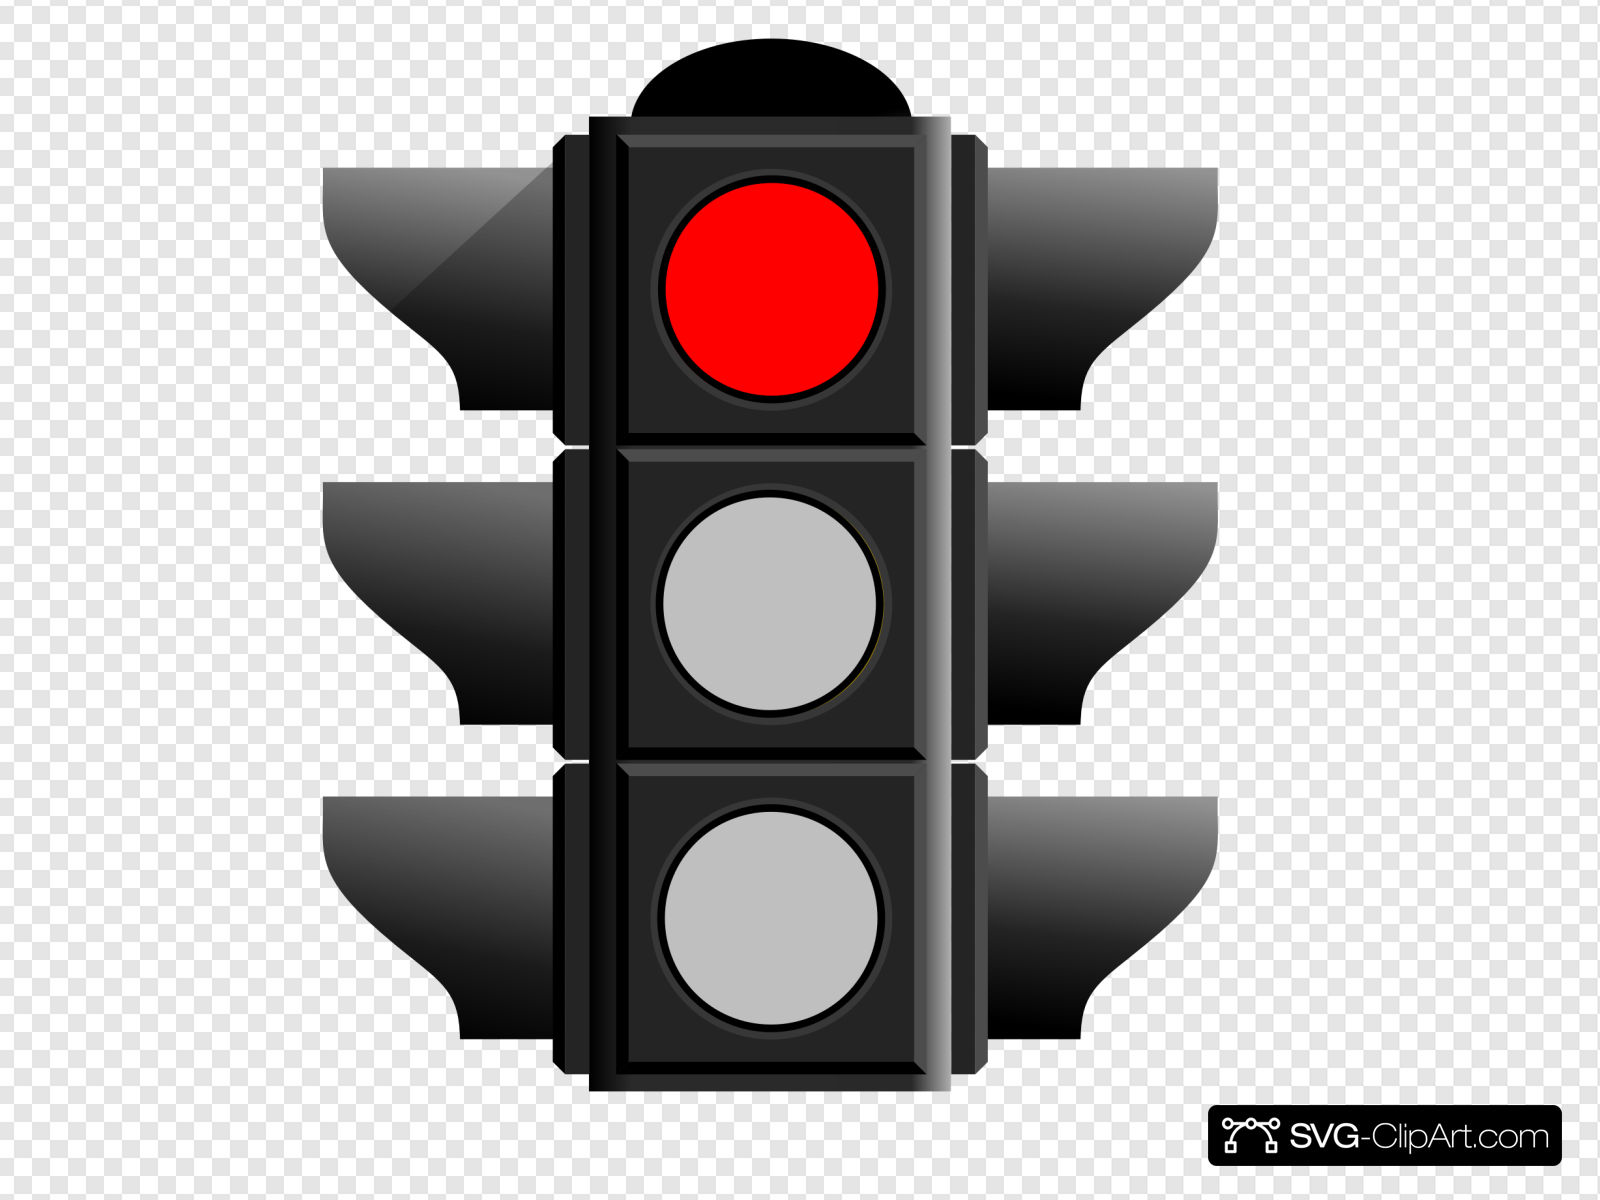 Red Traffic Light Clip art, Icon and SVG.